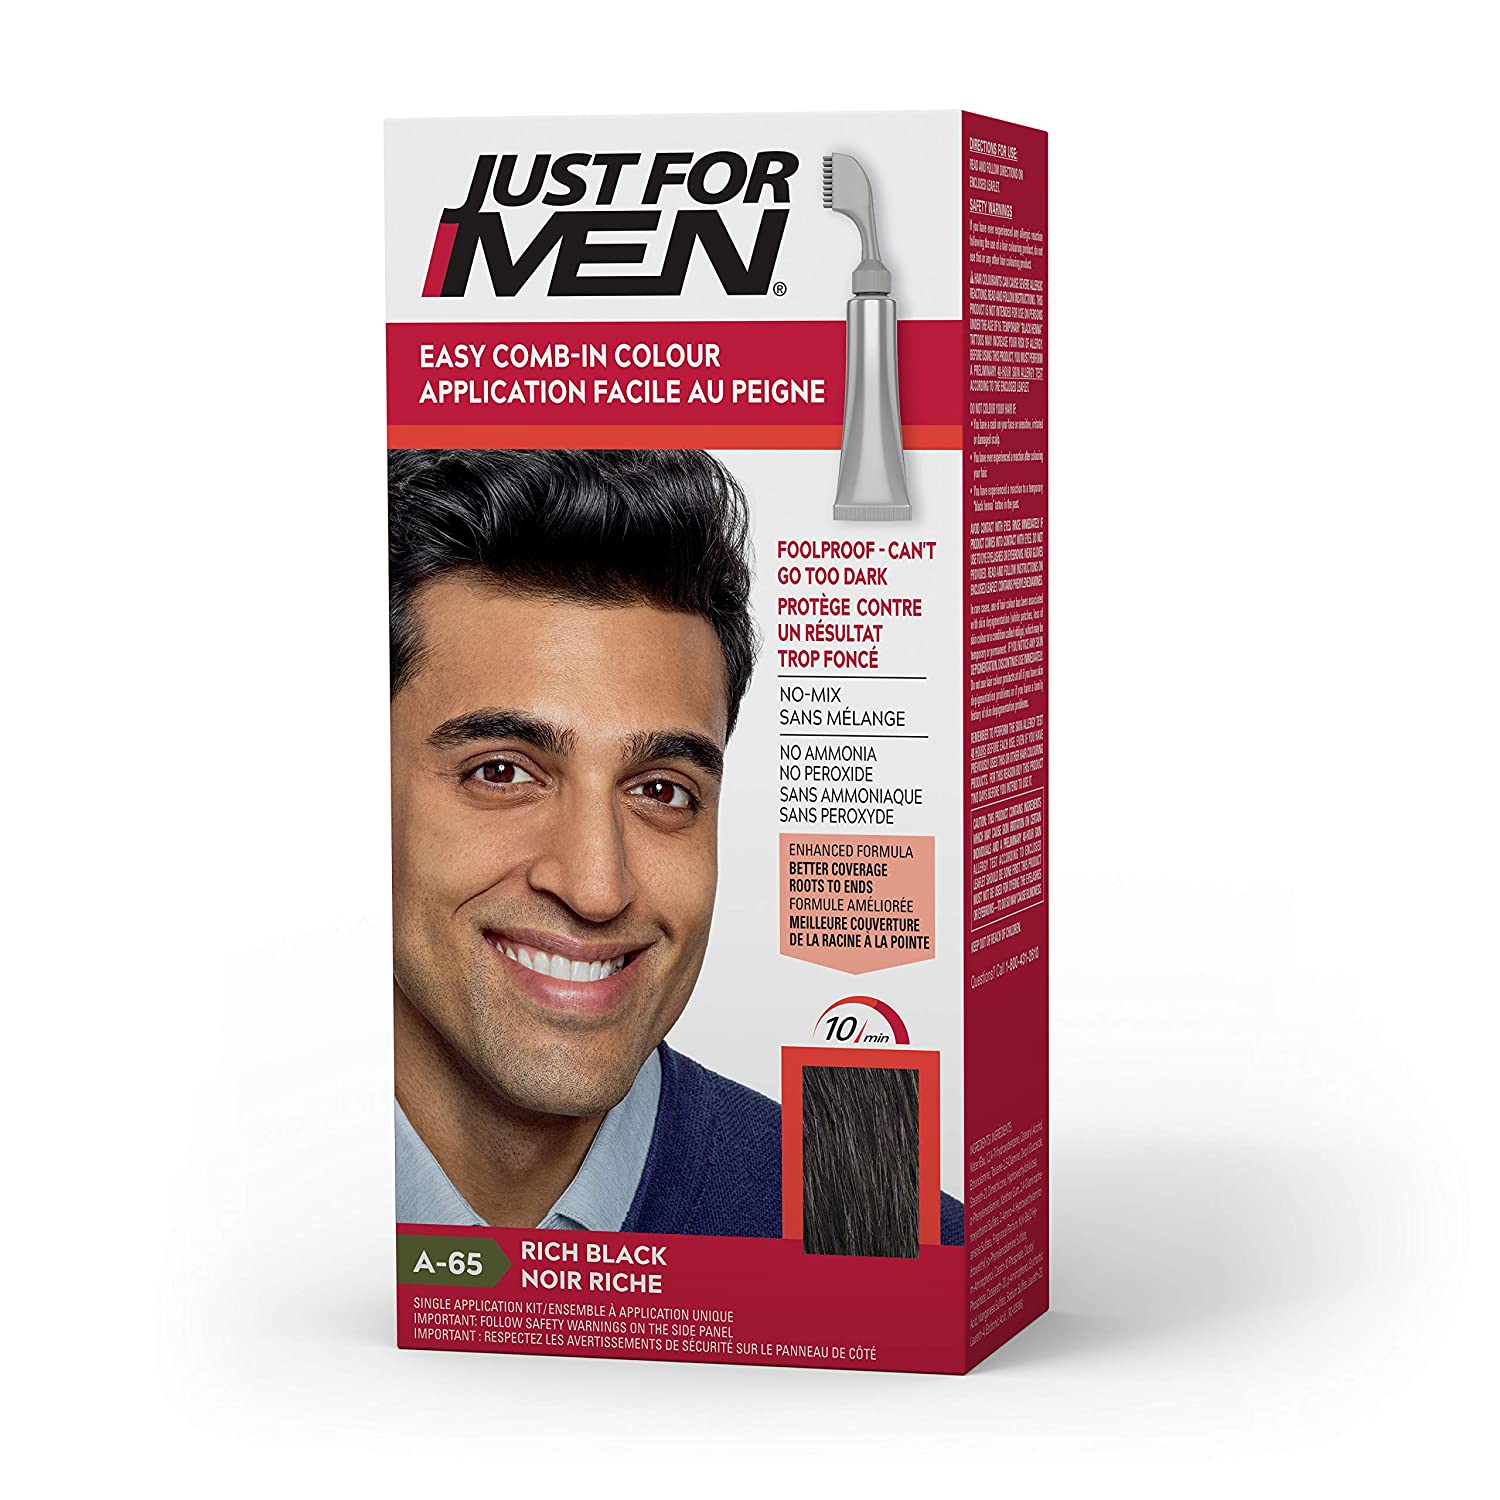 4th ave market: just for men autostop, easy no mix men's hair color with comb-in applicator, real black, shade a-55